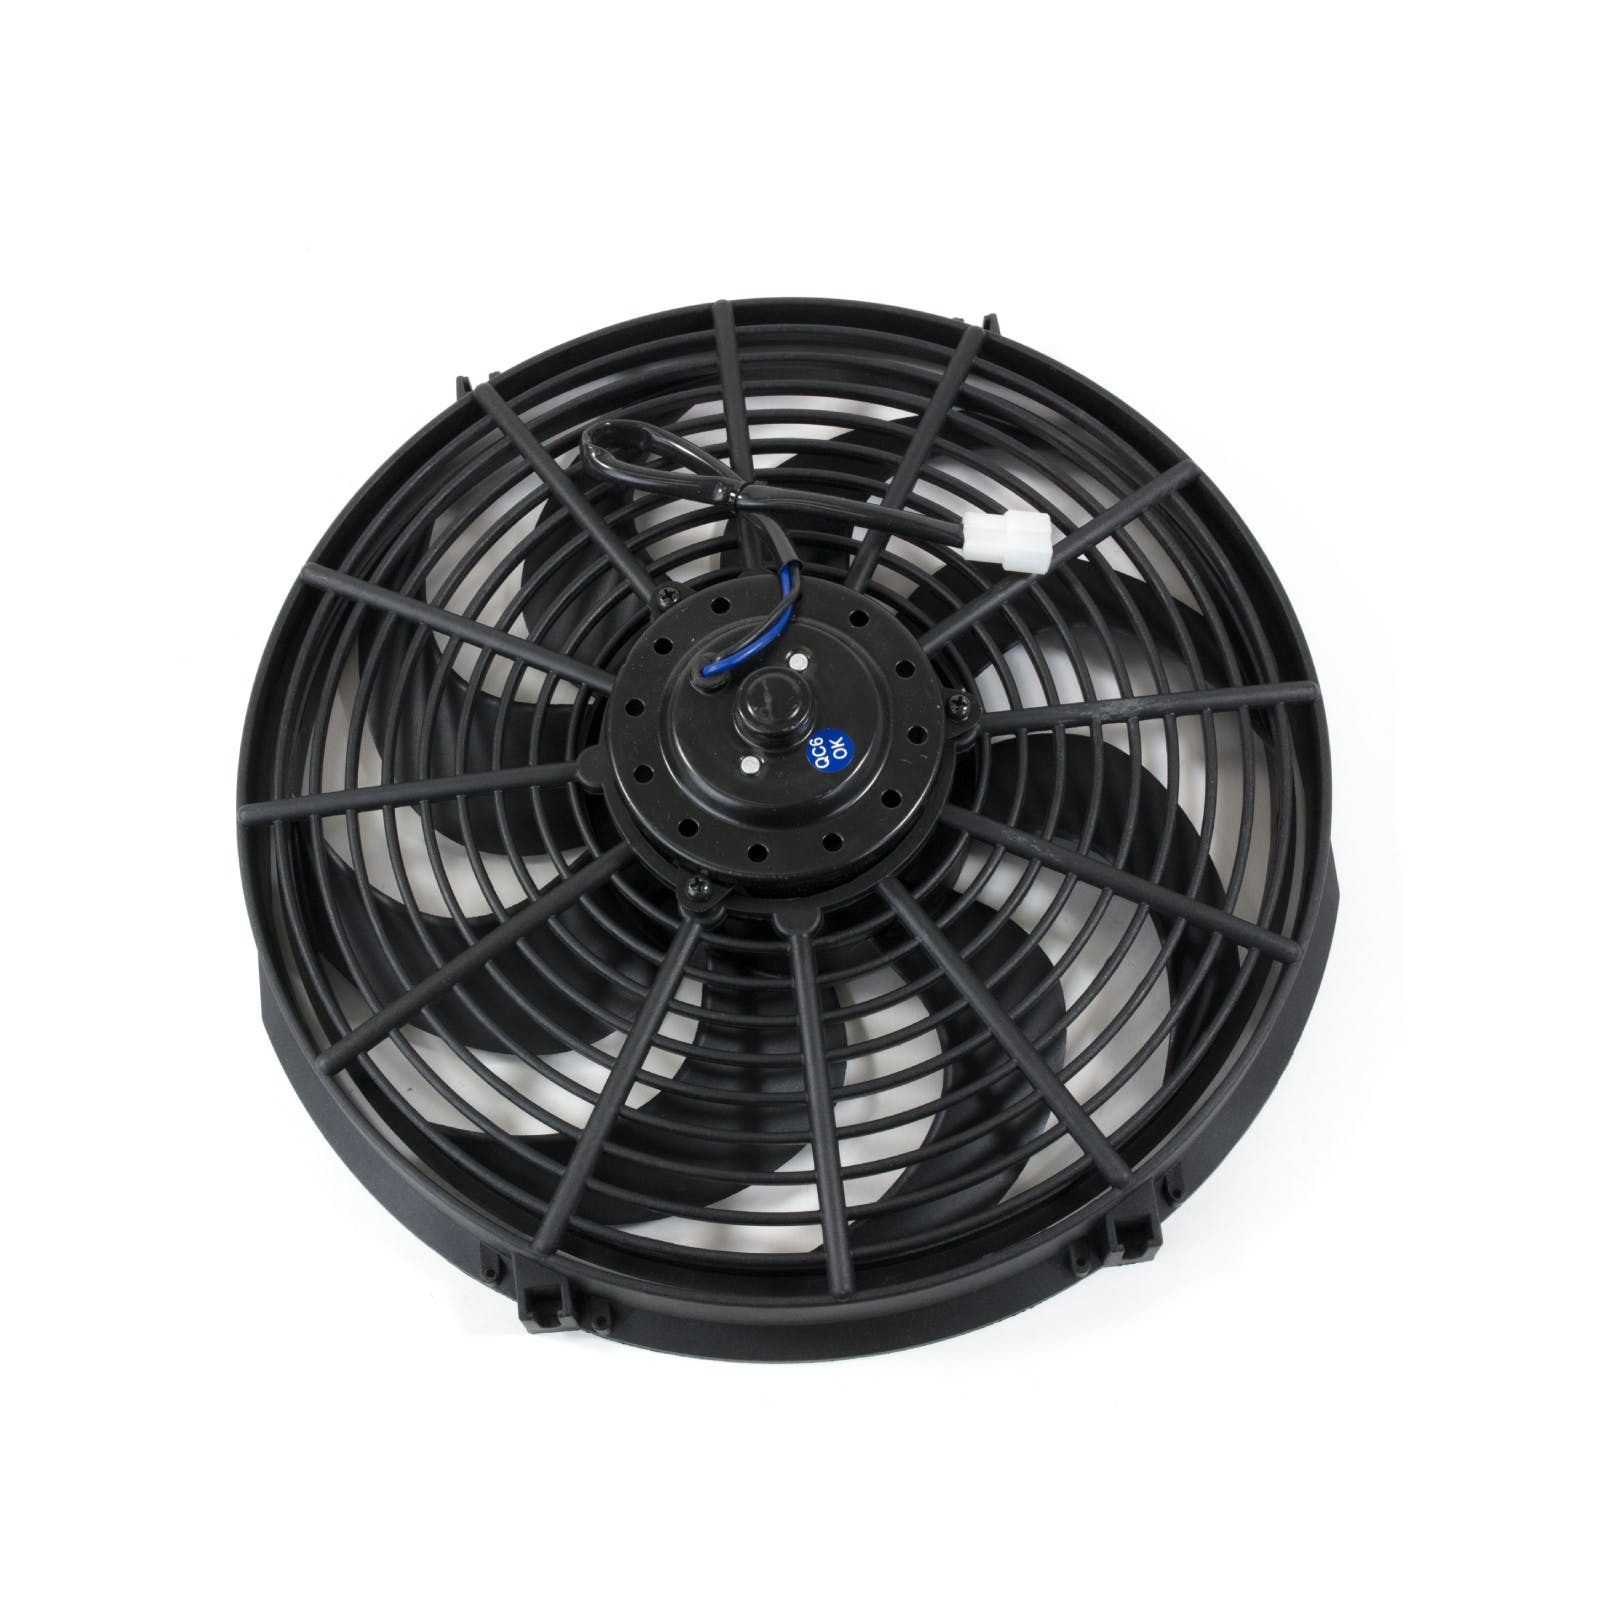 Top Street Performance HC7104 14 inch Pro Series Universal Electric Cooling Fan, S-Blade